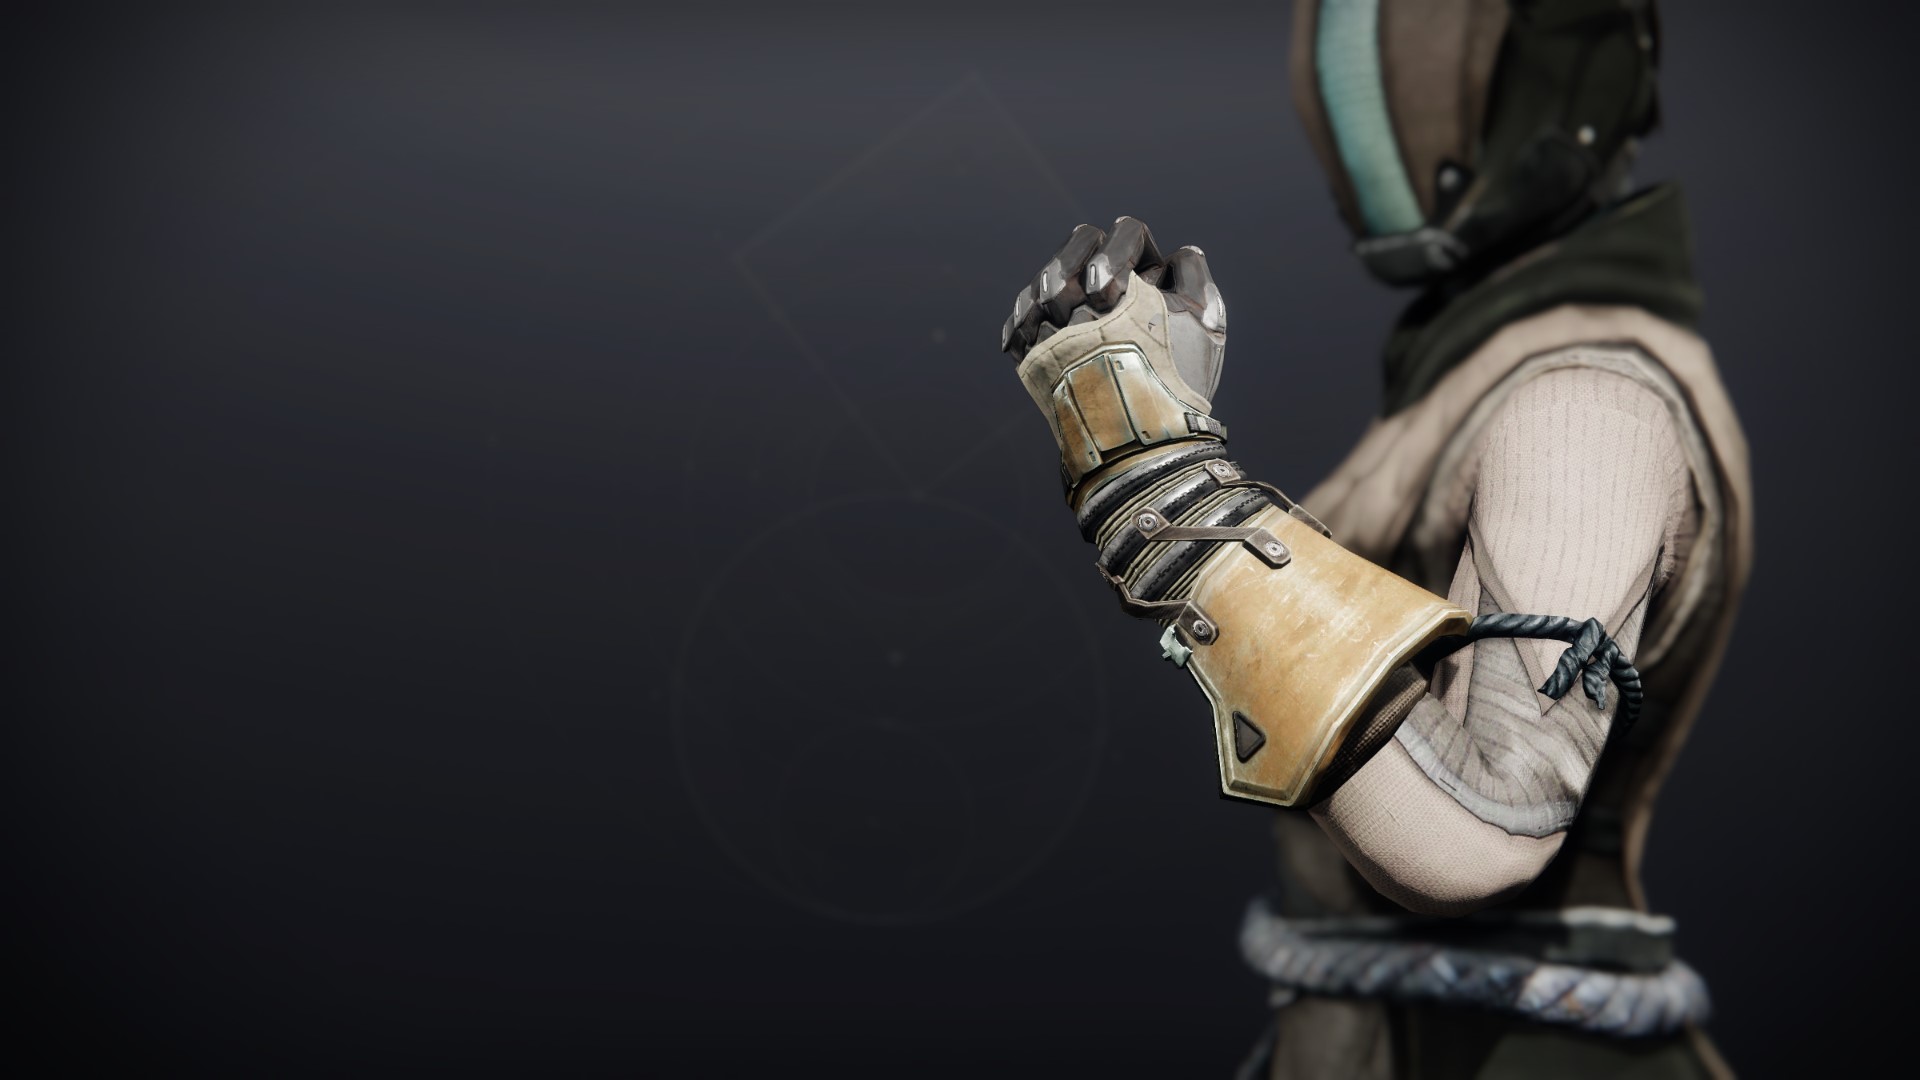 An in-game render of the Prodigal Gloves.